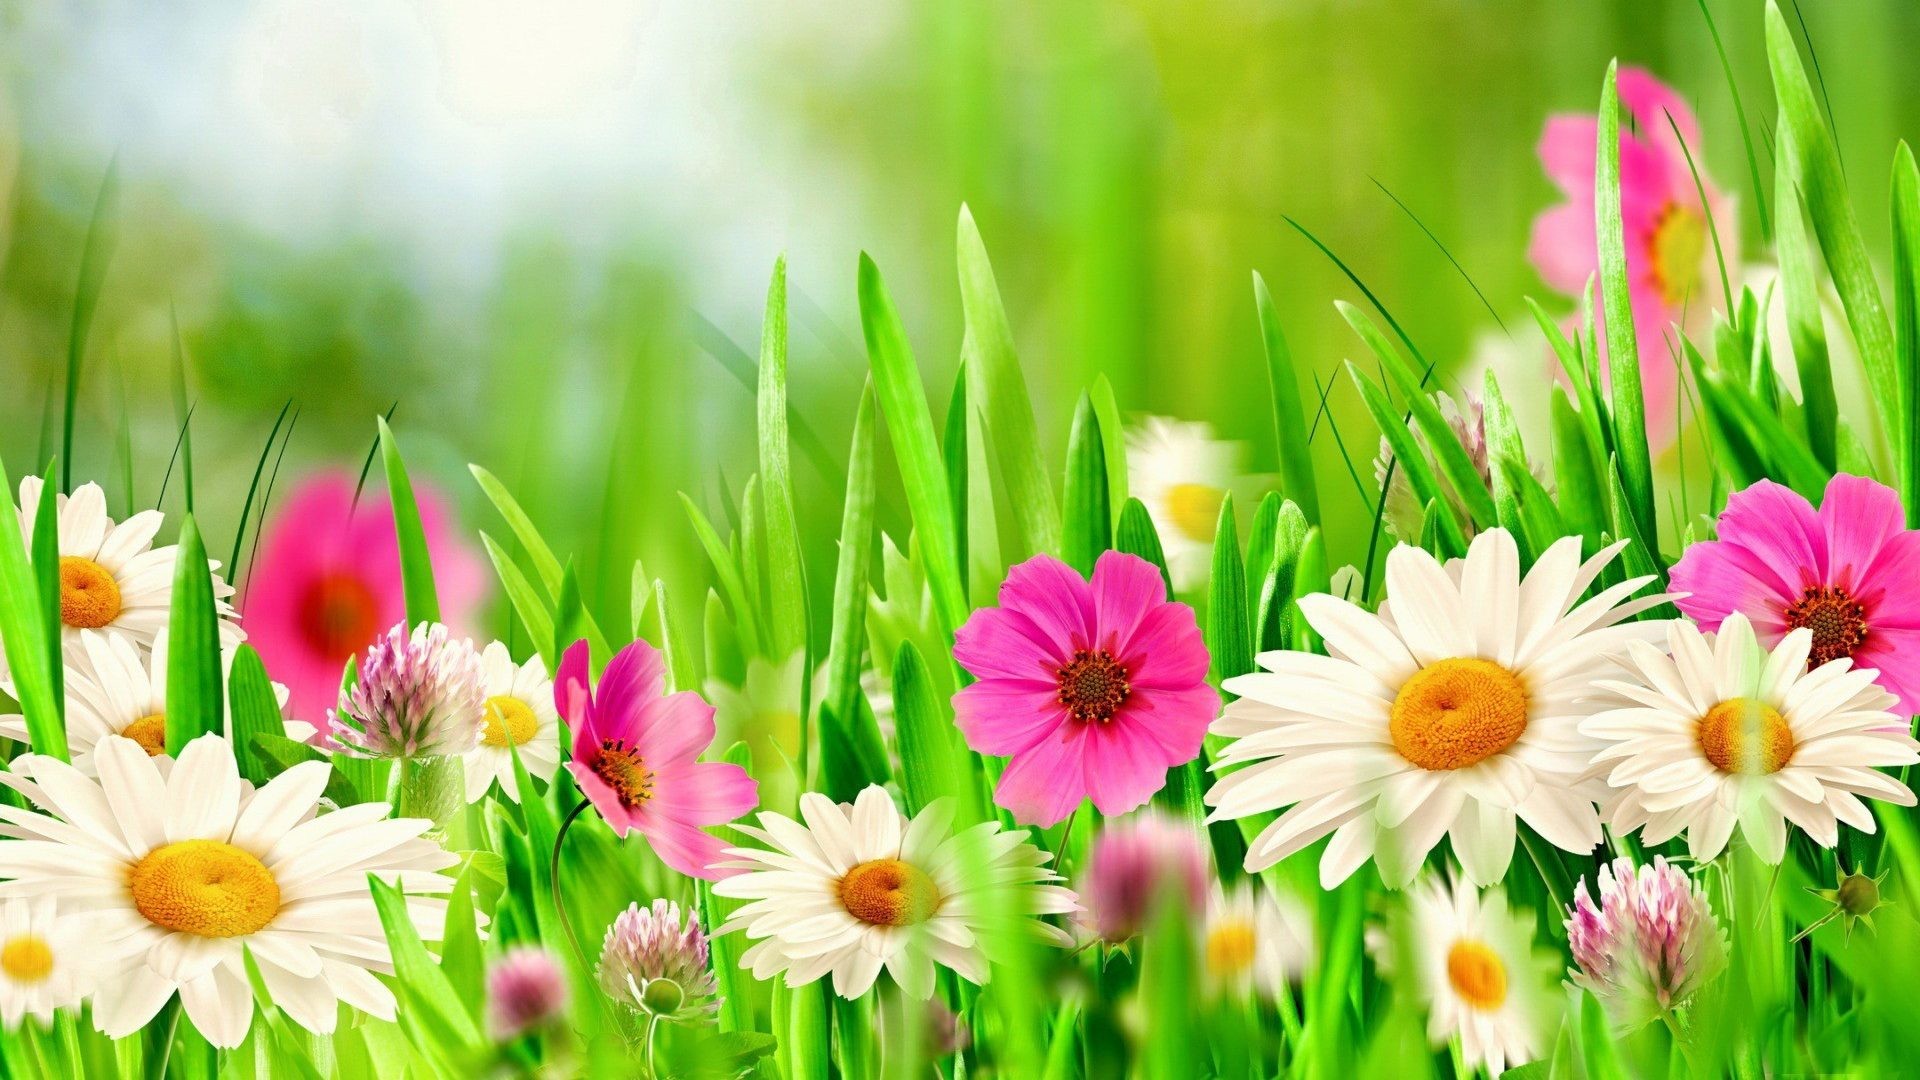 1920x1080 Meadow Flowers Daisies Grass Spring Flower Wallpaper For Windows 7 Free  Download - 1920x1200